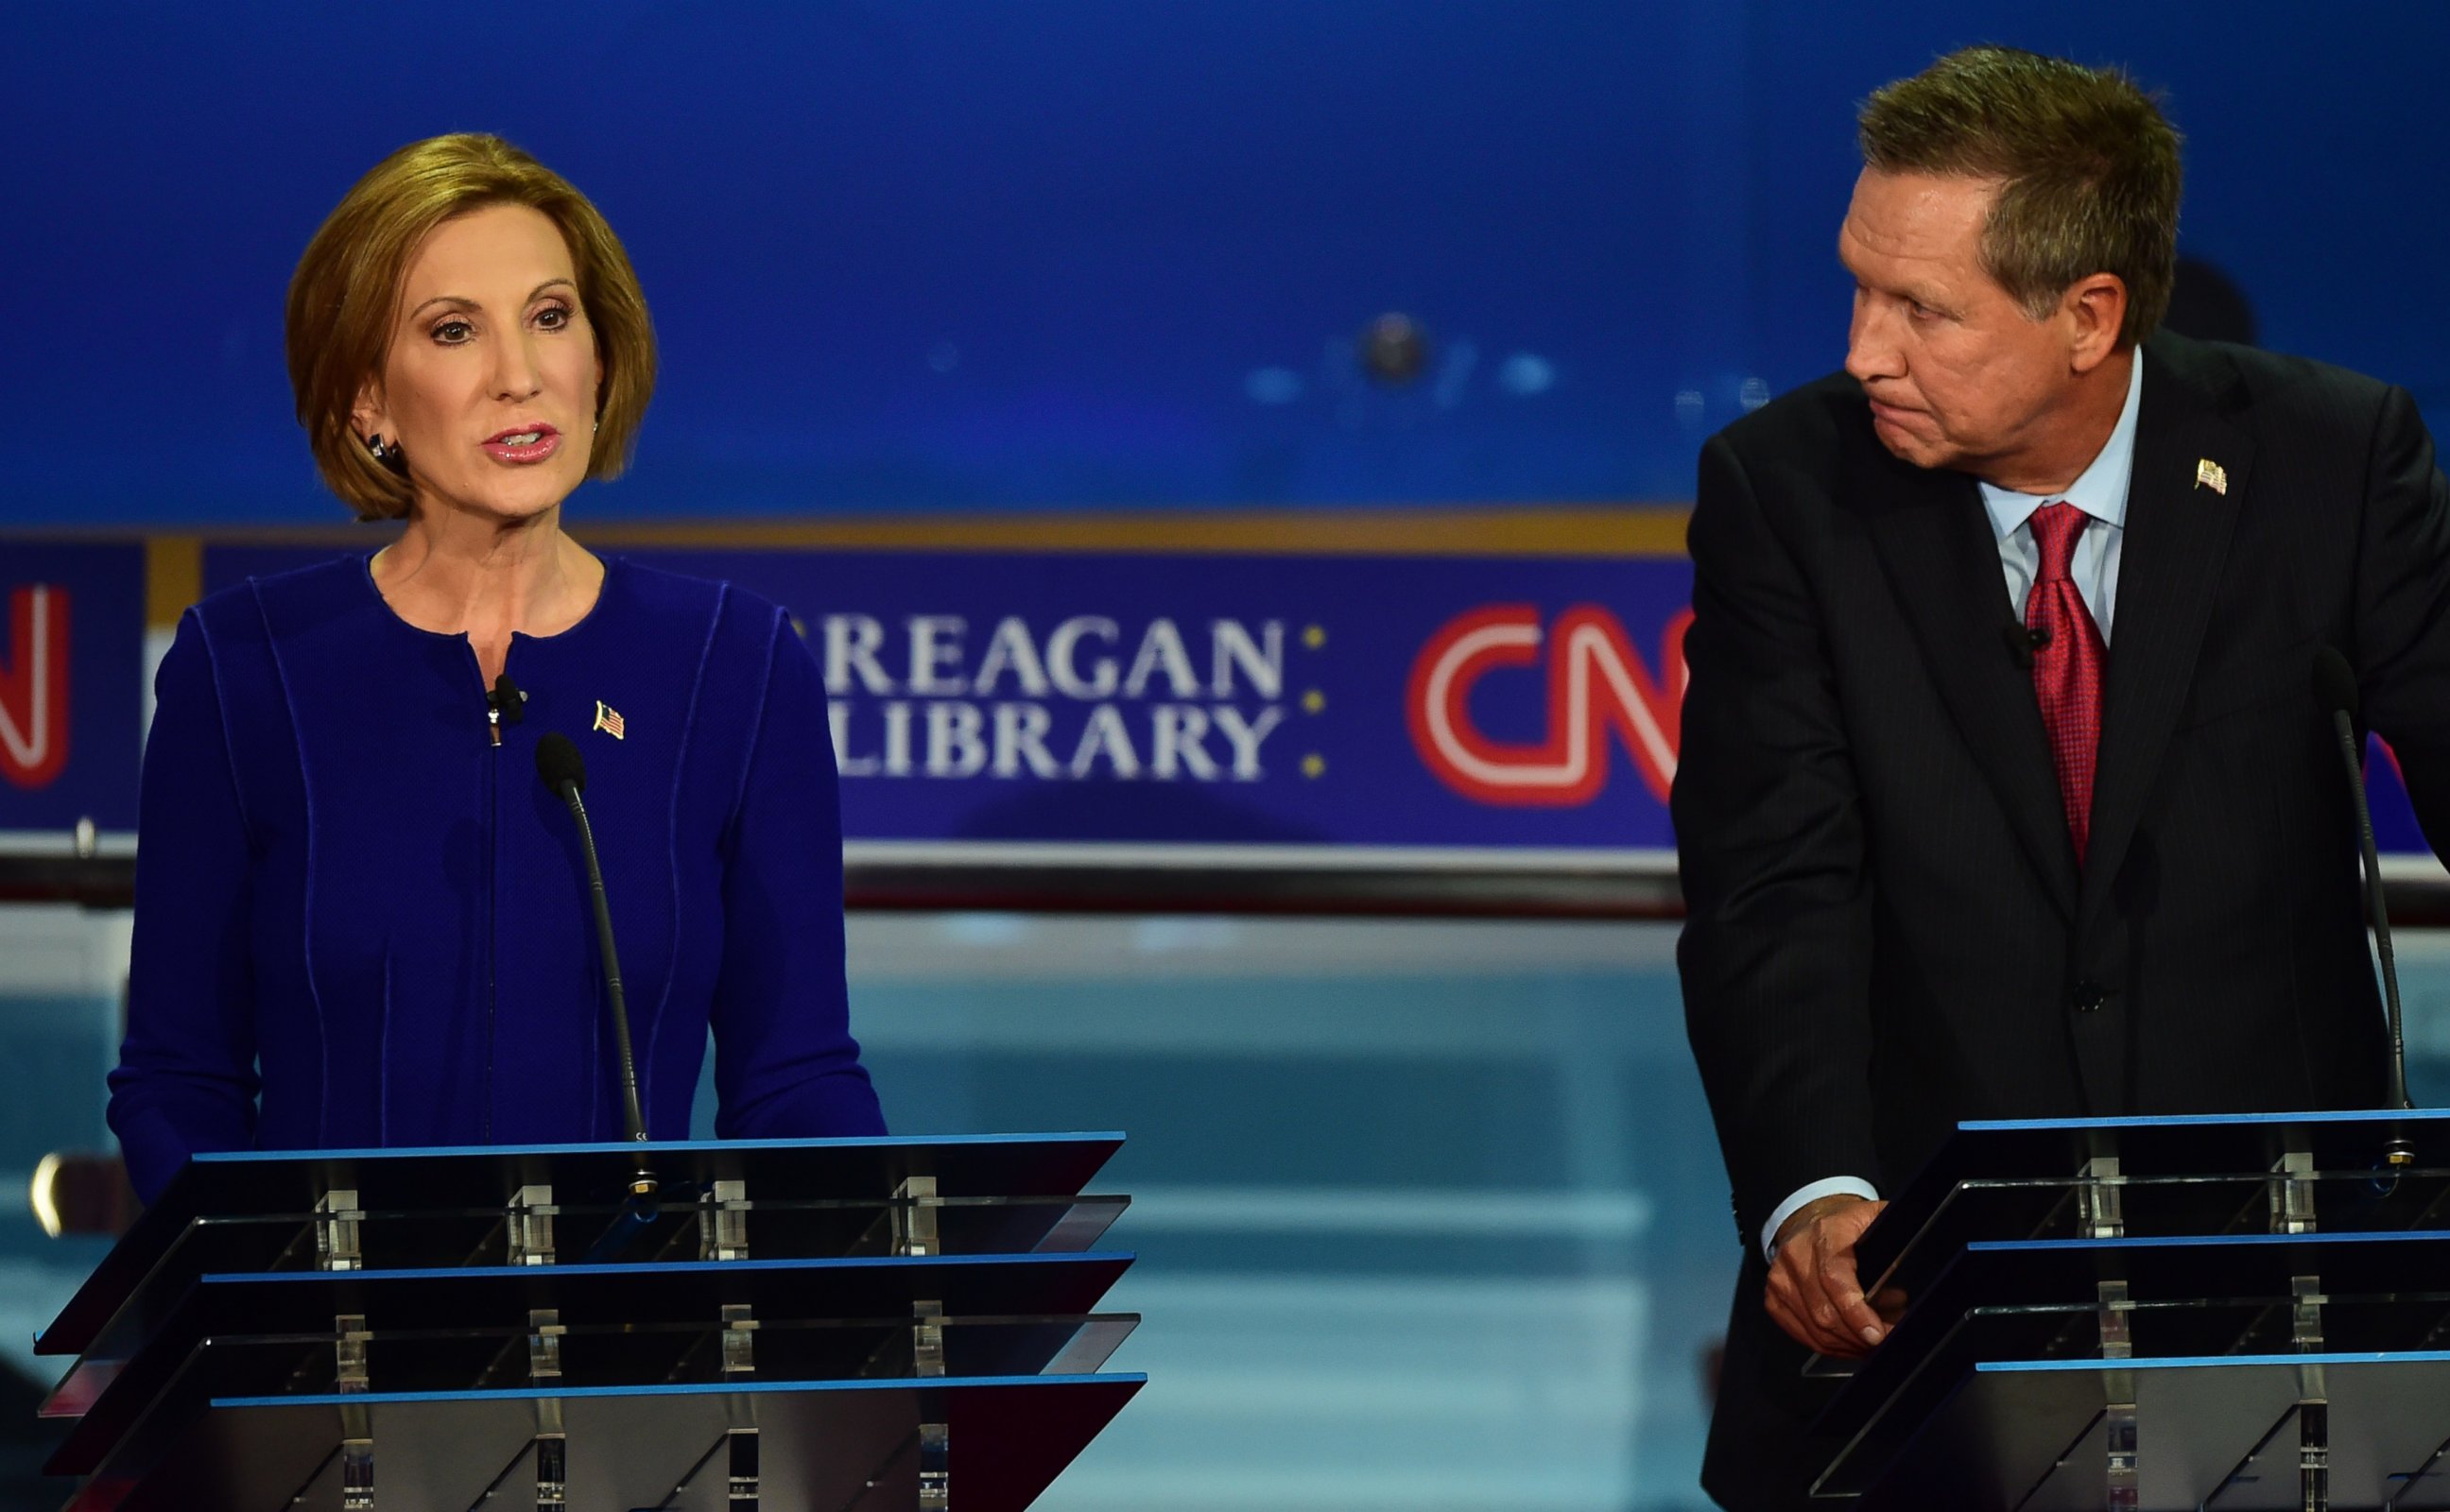 PHOTO:John Kasich looks on as Carly Fiorina, speaks during the Presidential debate at the Ronald Reagan Presidential Library in Simi Valley, Calif., Sept. 16, 2015. 